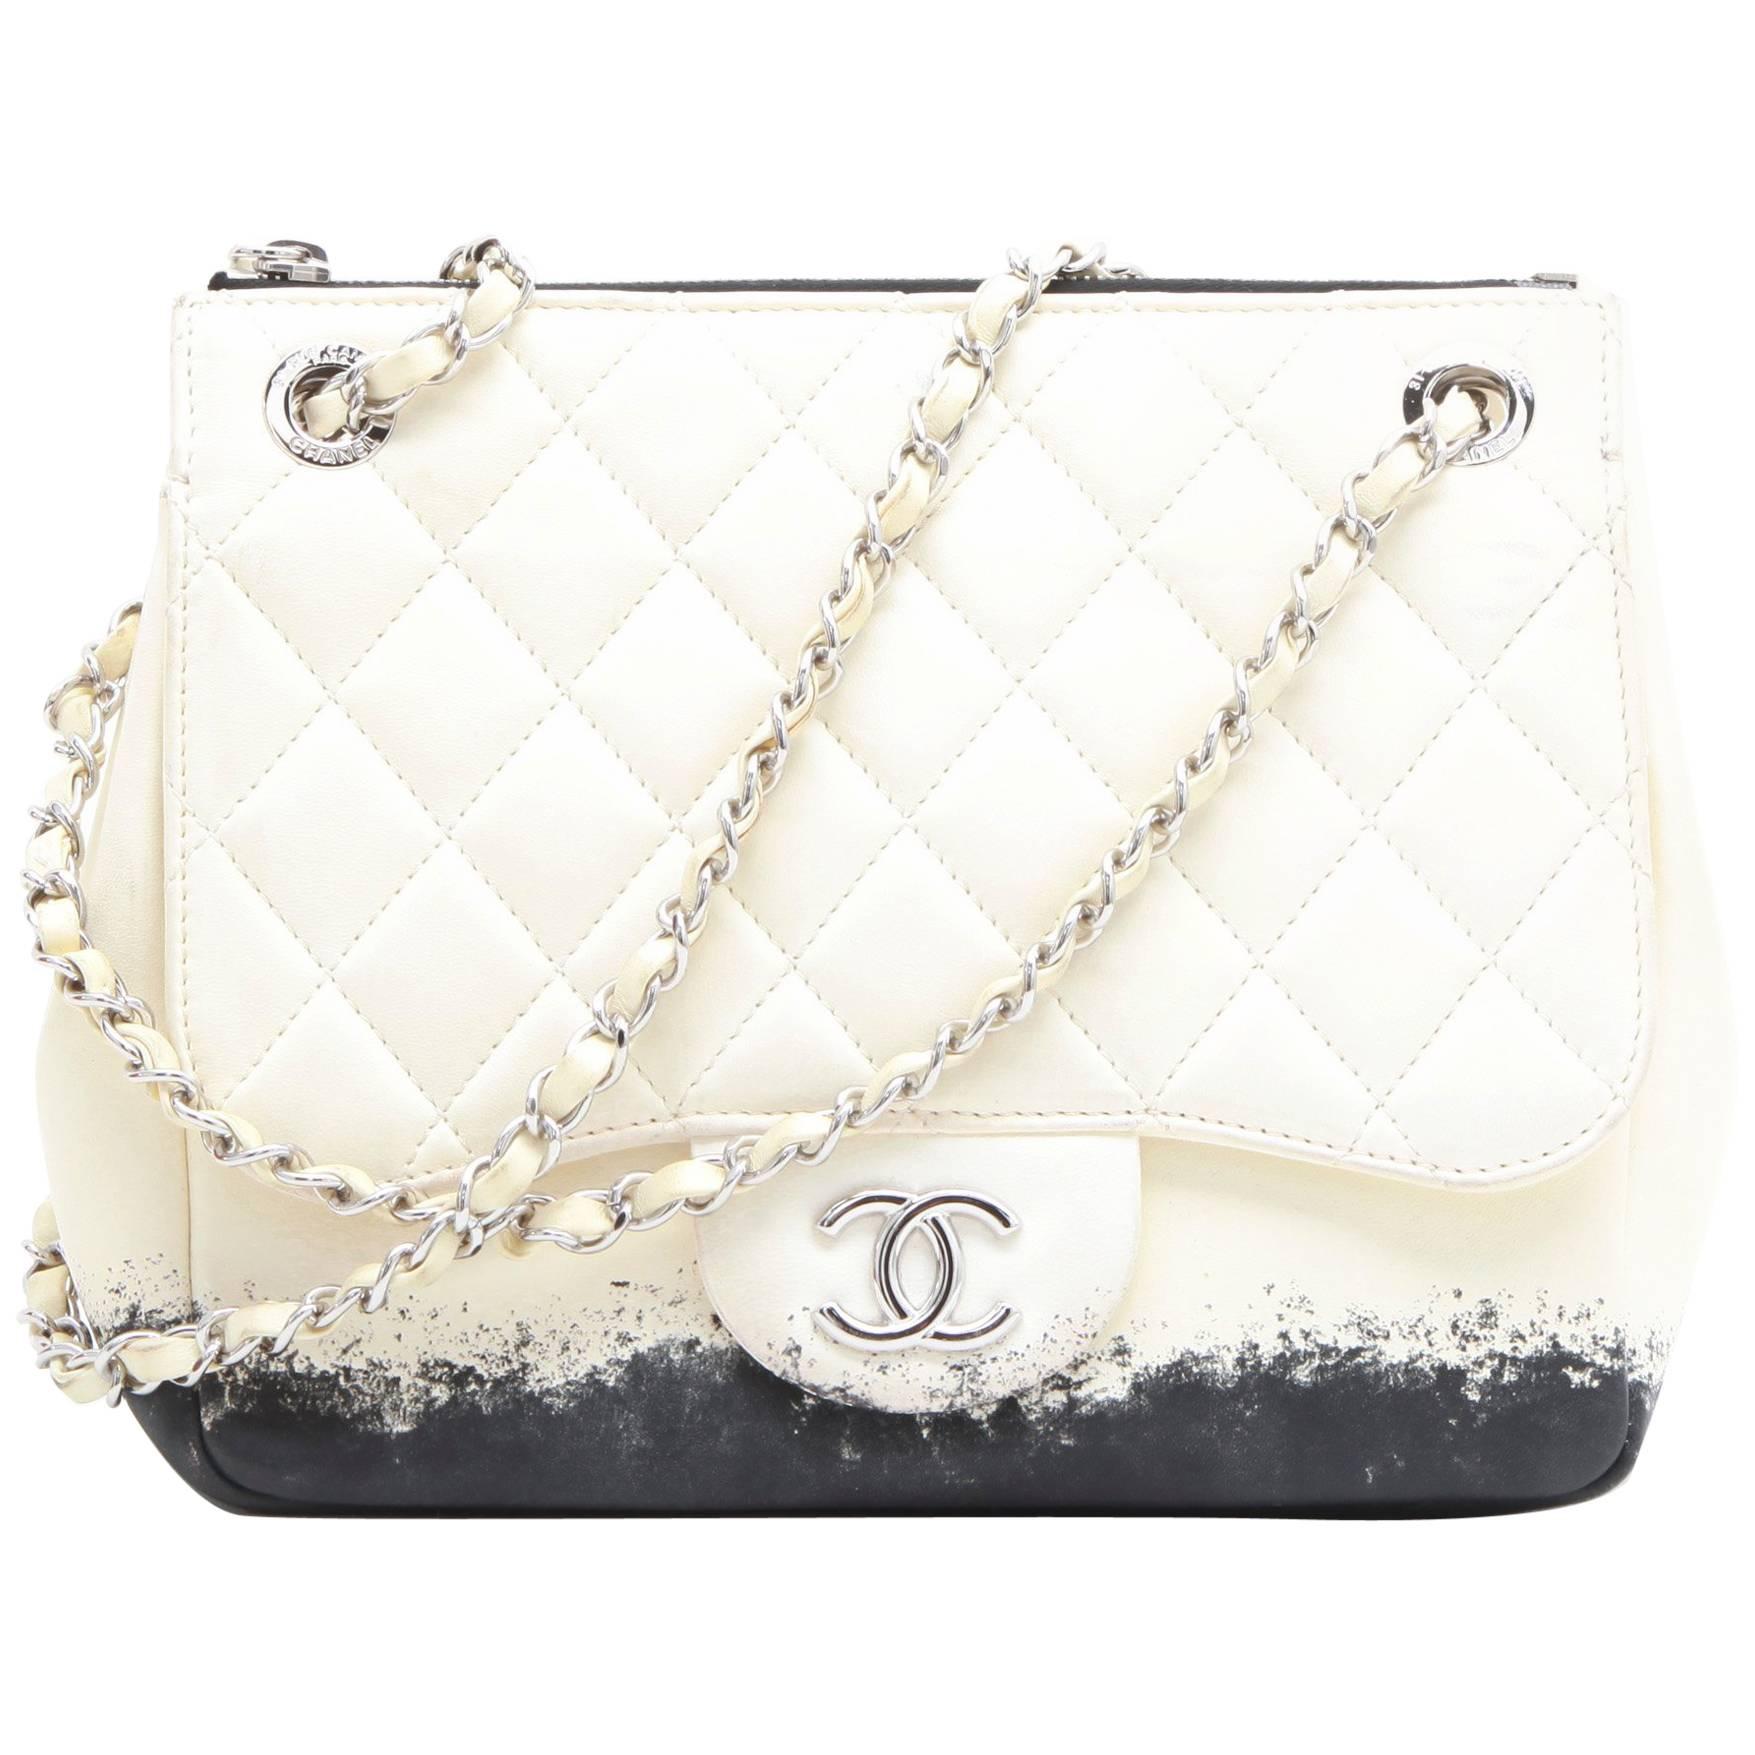 CHANEL Bag in Beige and Black Lamb Leather